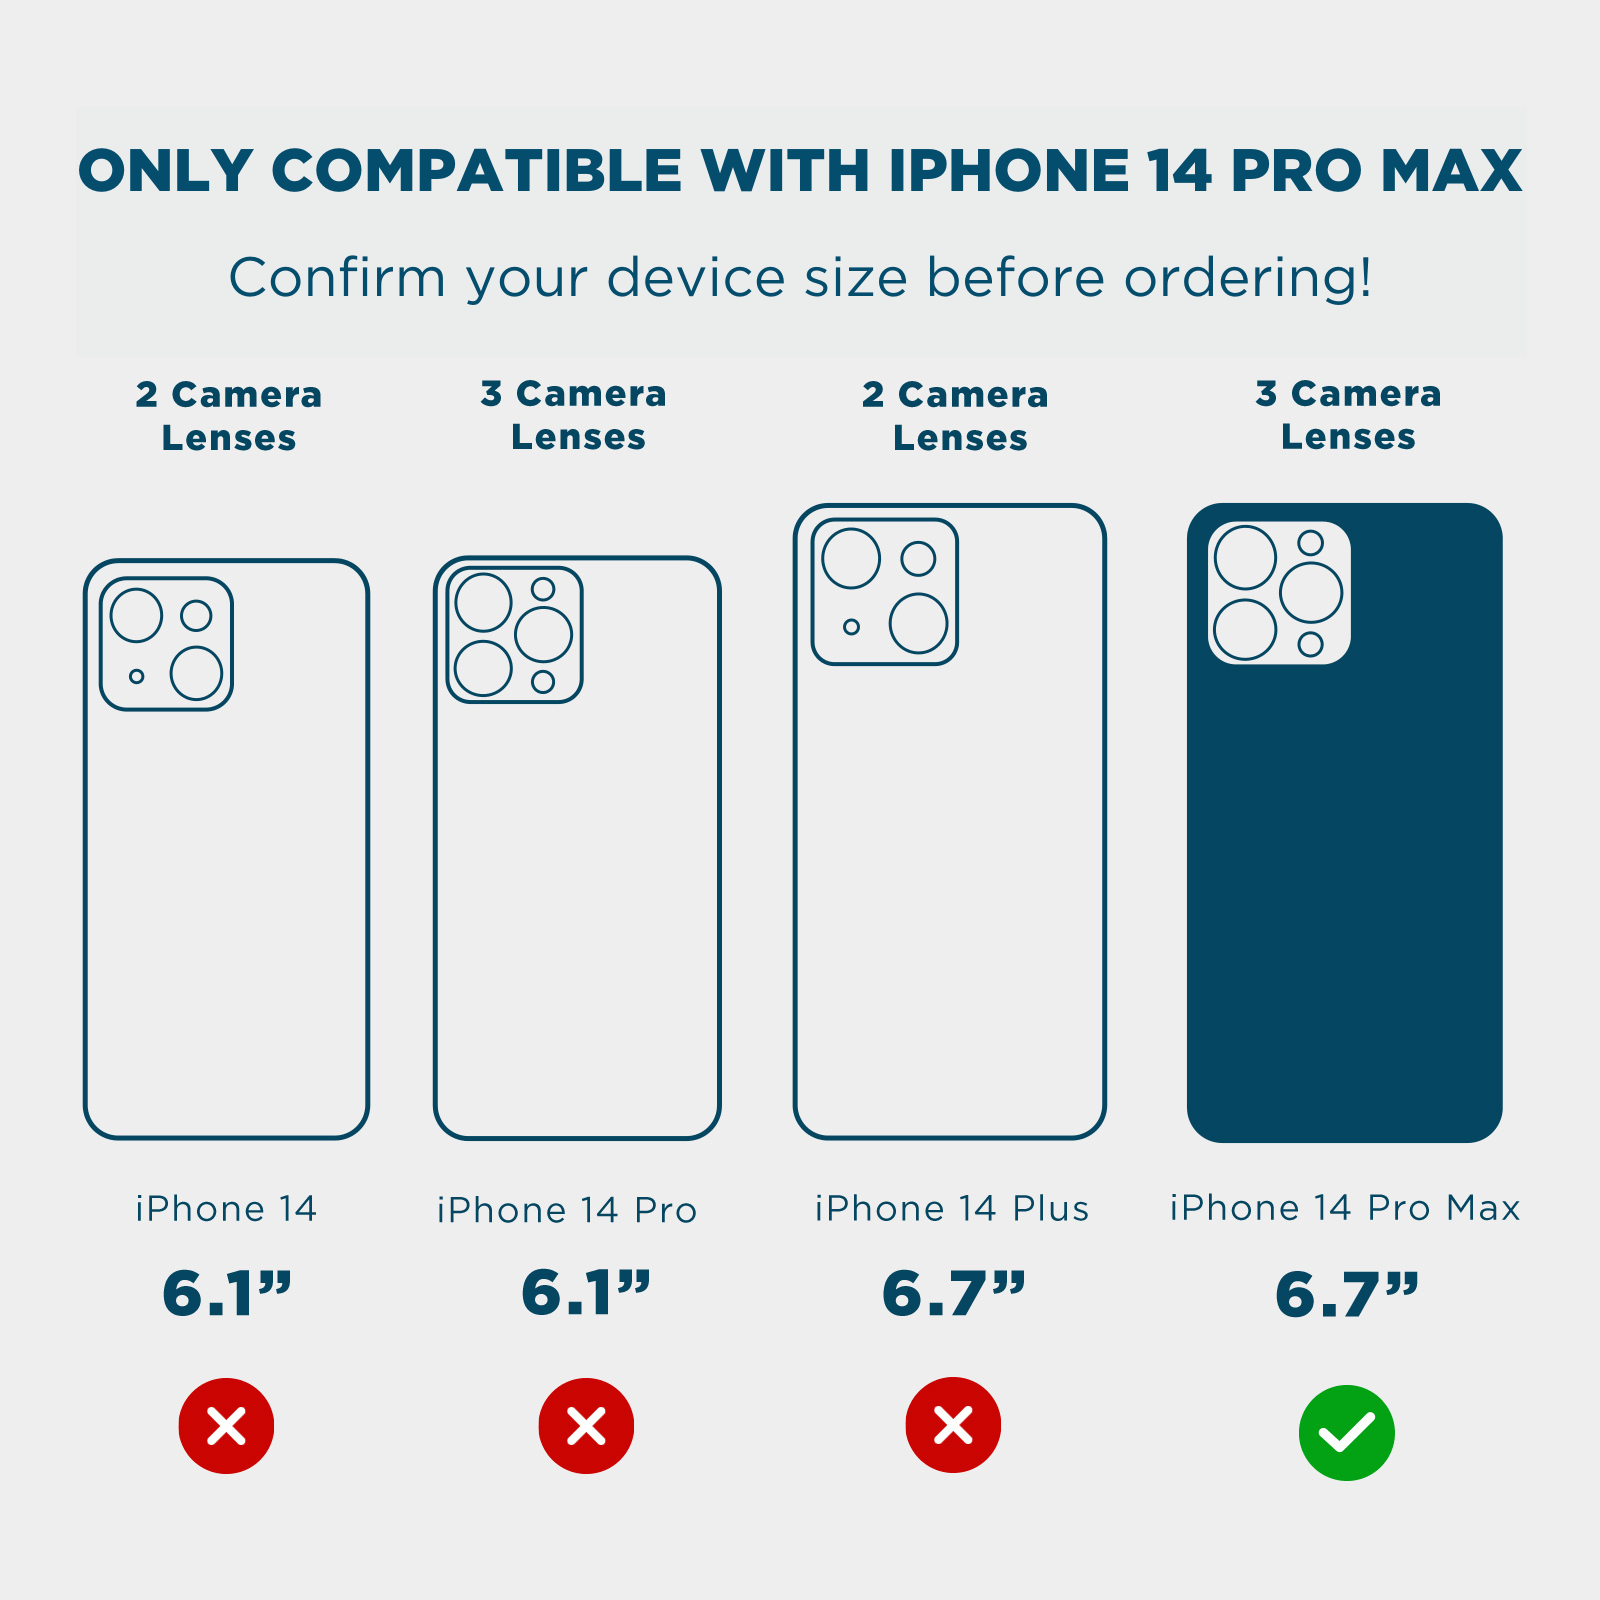 ONLY COMPATIBLE WITH IPHONE 14 PRO MAX. CONFIRM YOUR DEVICE SIZE BEFORE ORDERING. 2 CAMERA LENSES, 3 CAMERA LENSES, 2 CAMERA LENSES, 3 CAMERA LENSES, 6.1, 6.1, 6.7, 6.7. COLOR::HOT PINK